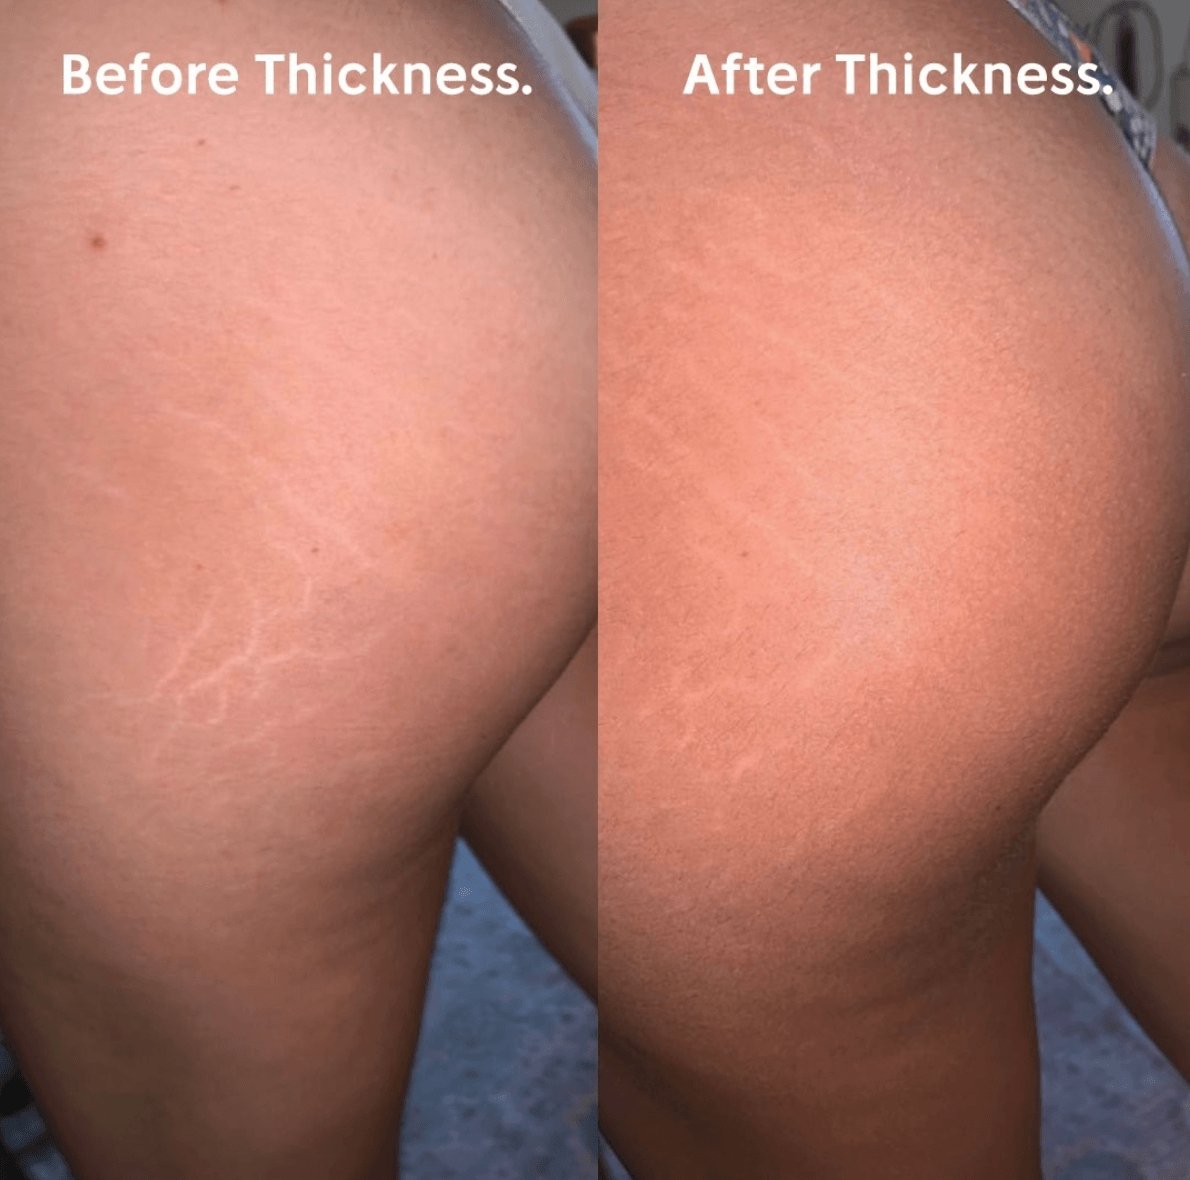 Olivia used Down with the thickness to reduce stretch marks and acne - Anese